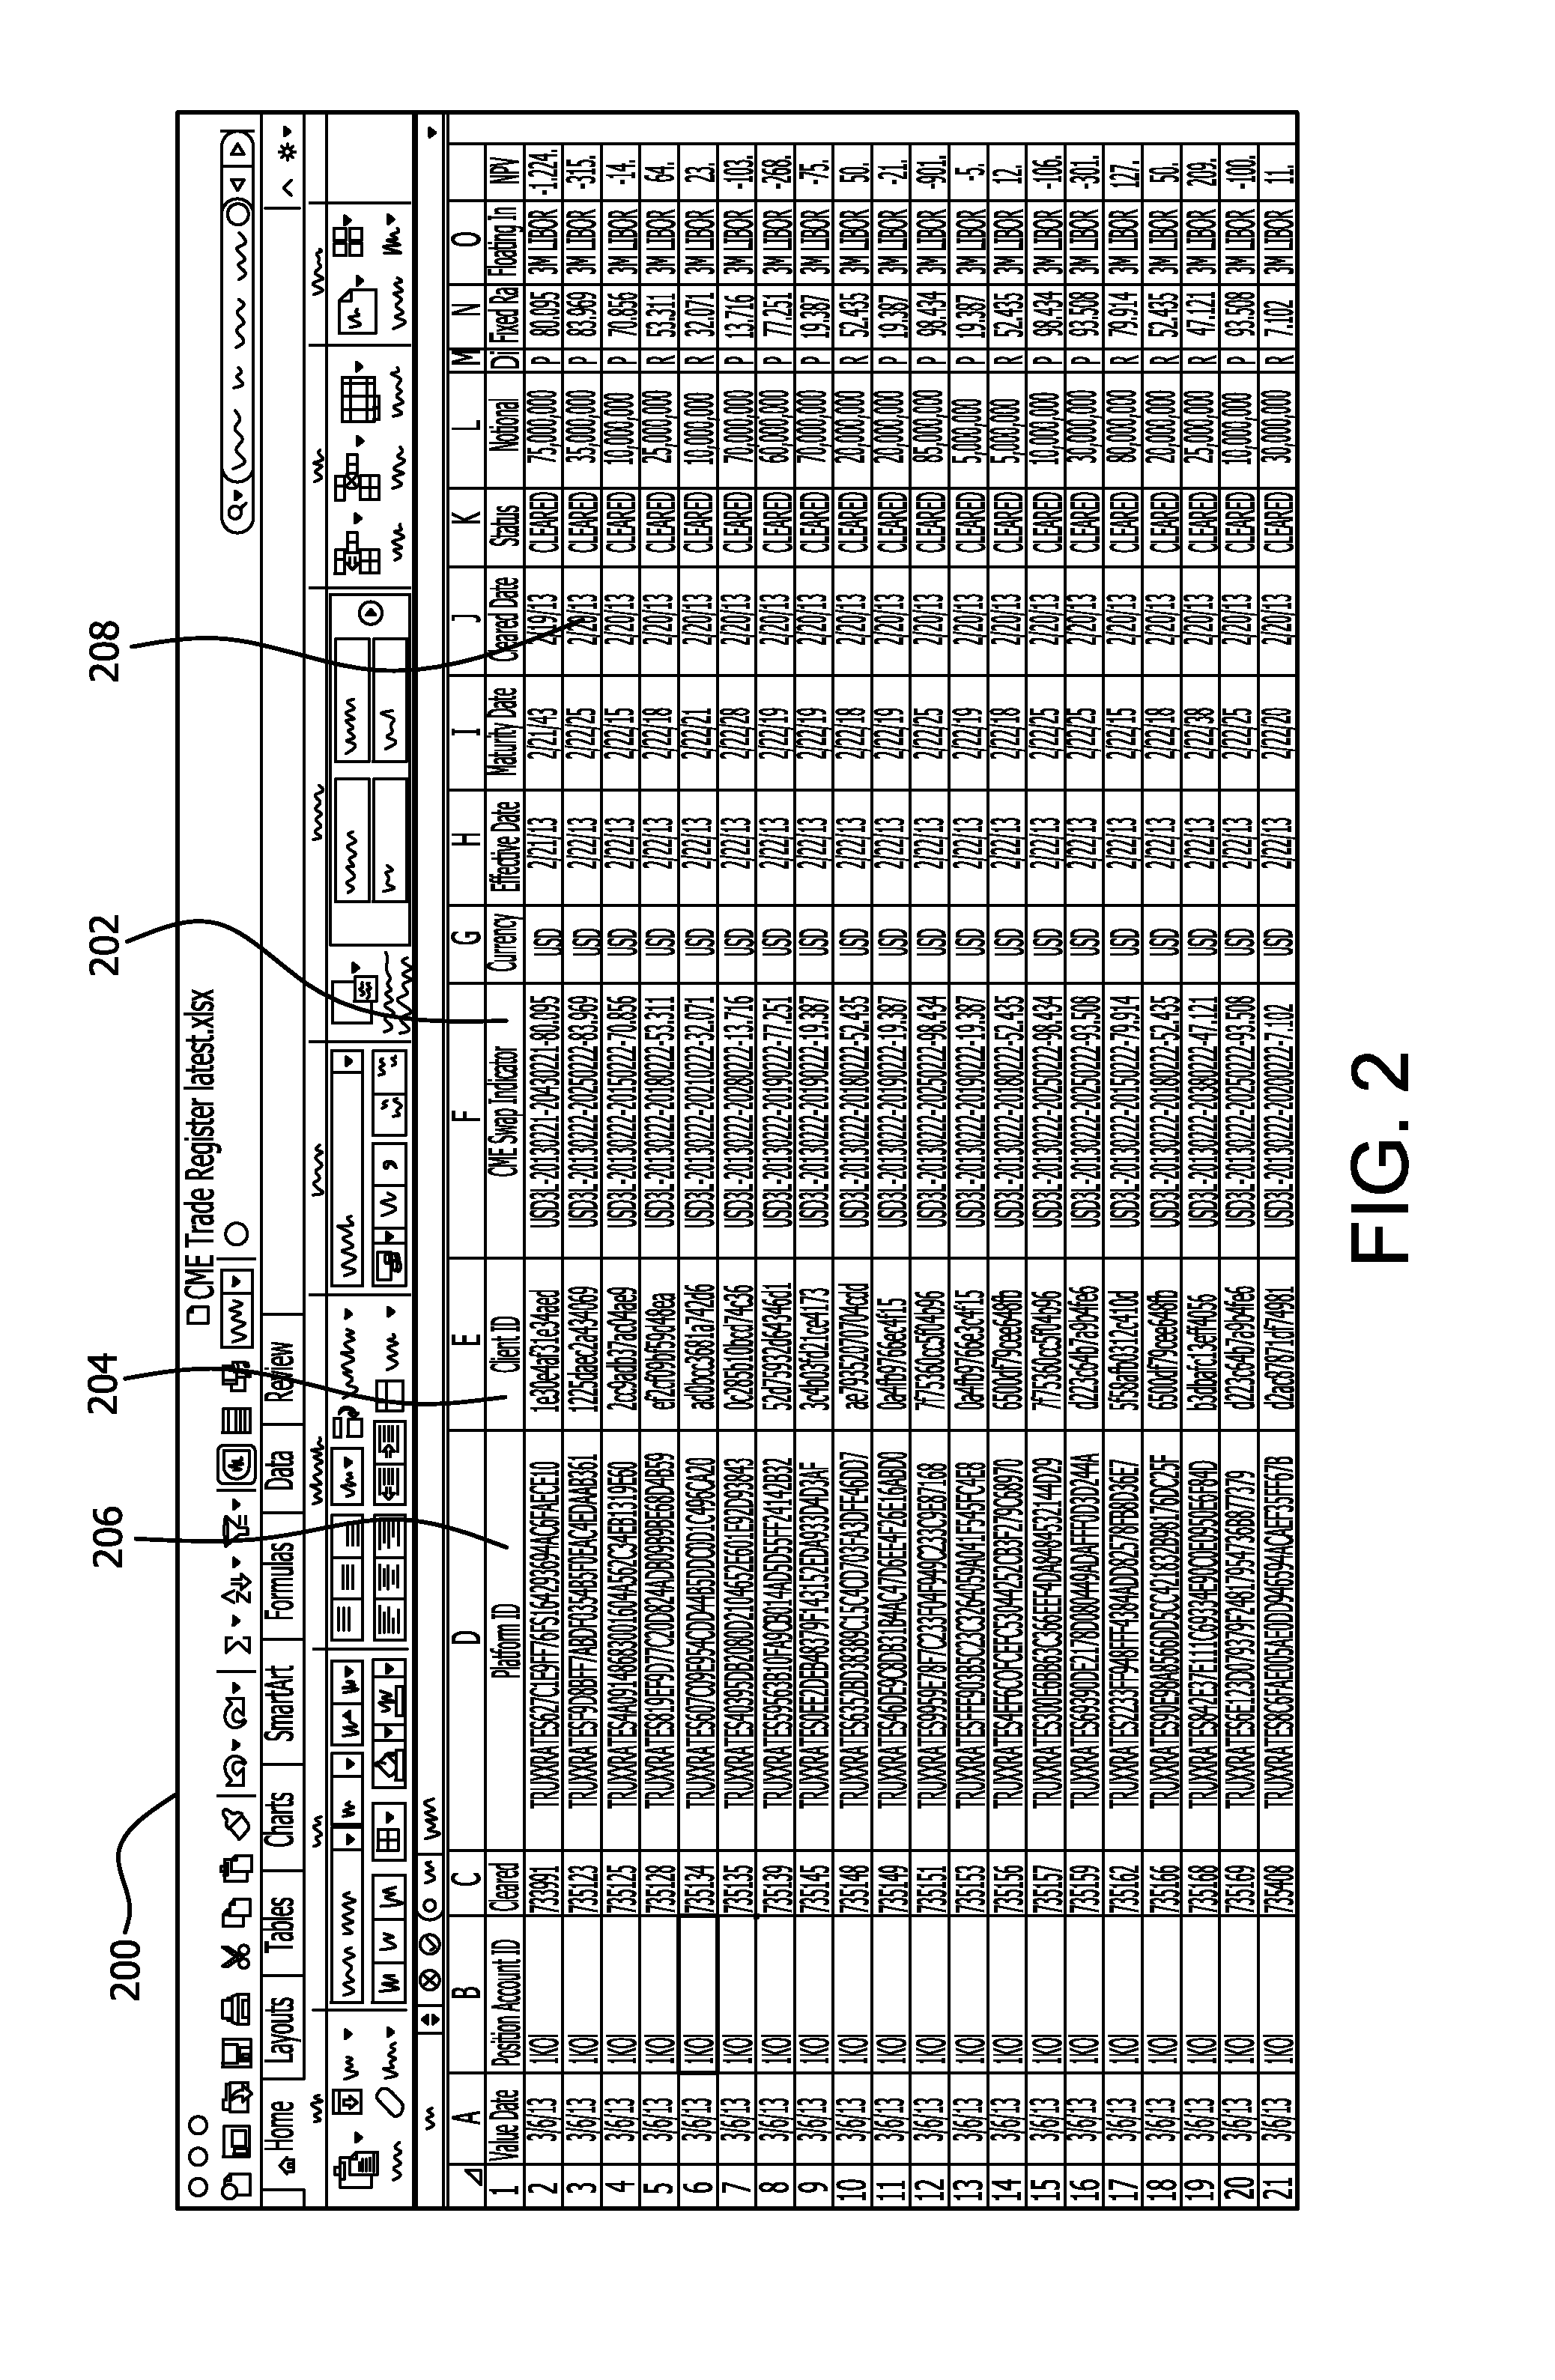 System and Method for Managing Derivative Instruments